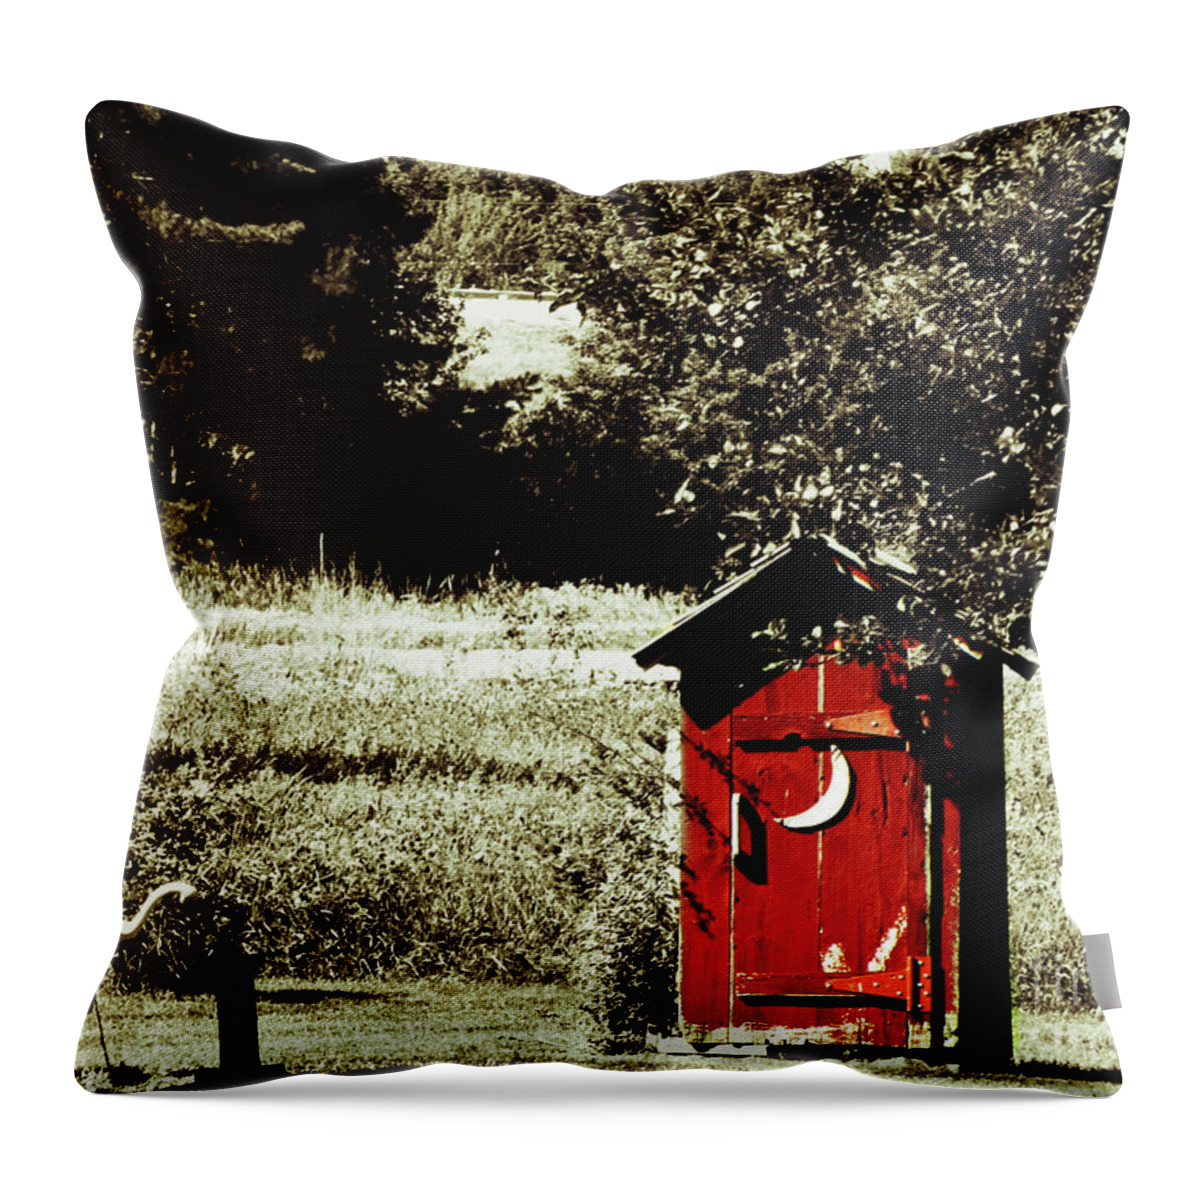 Landscape Throw Pillow featuring the photograph Little Red Outhouse by Ms Judi